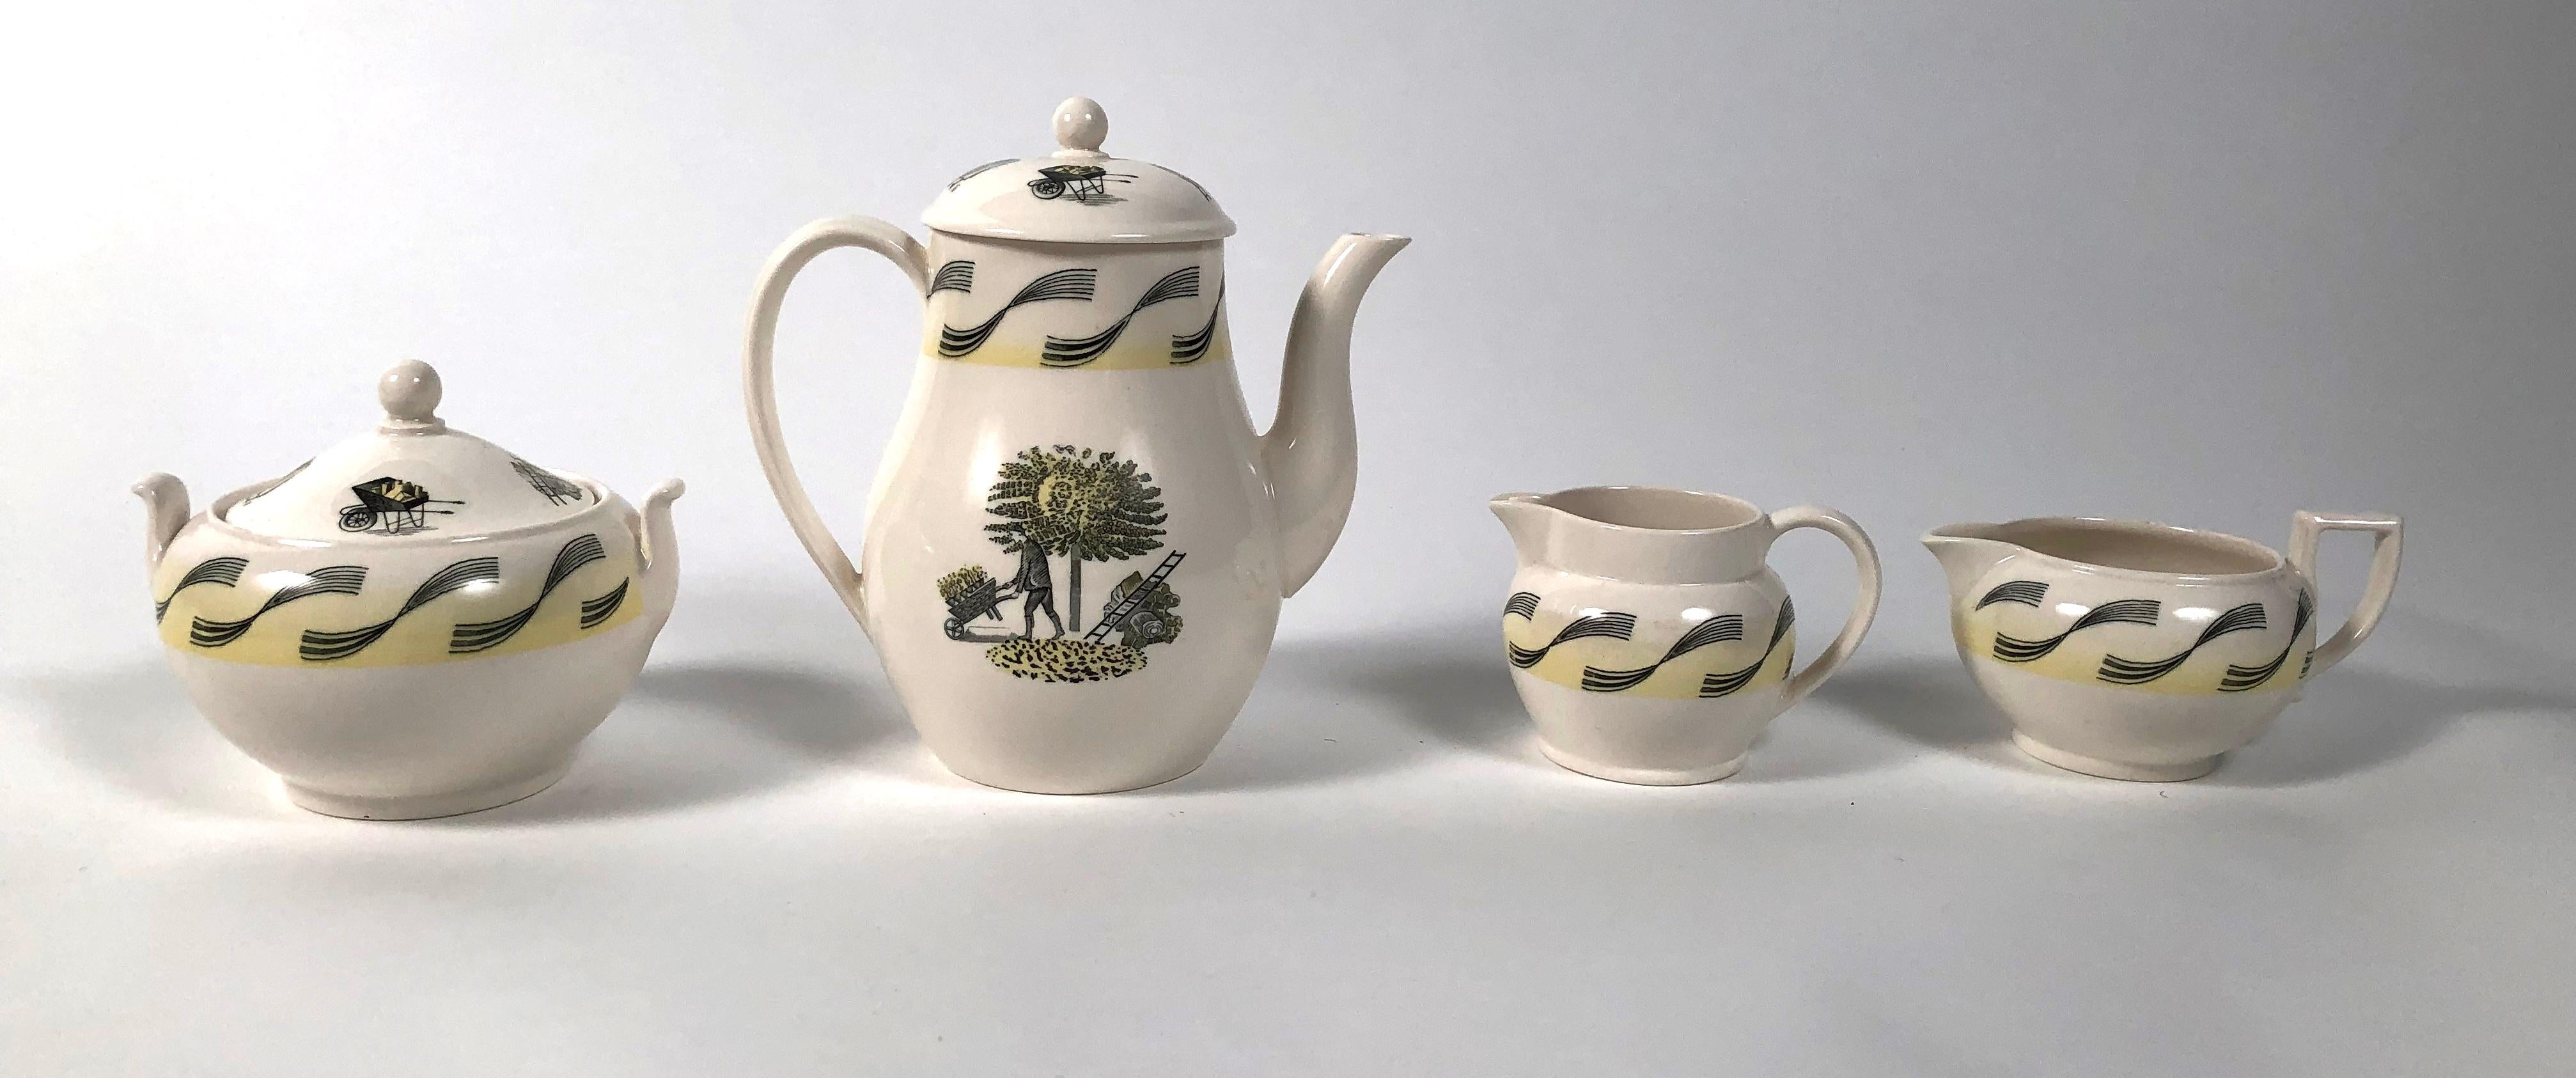 An original Eric Ravilious designed four piece coffee service for Wedgwood from the Garden series, designed circa 1938 and produced circa 1951-1954, comprising a coffee pot with cover, covered sugar bowl and 2 creamers in different shapes, in